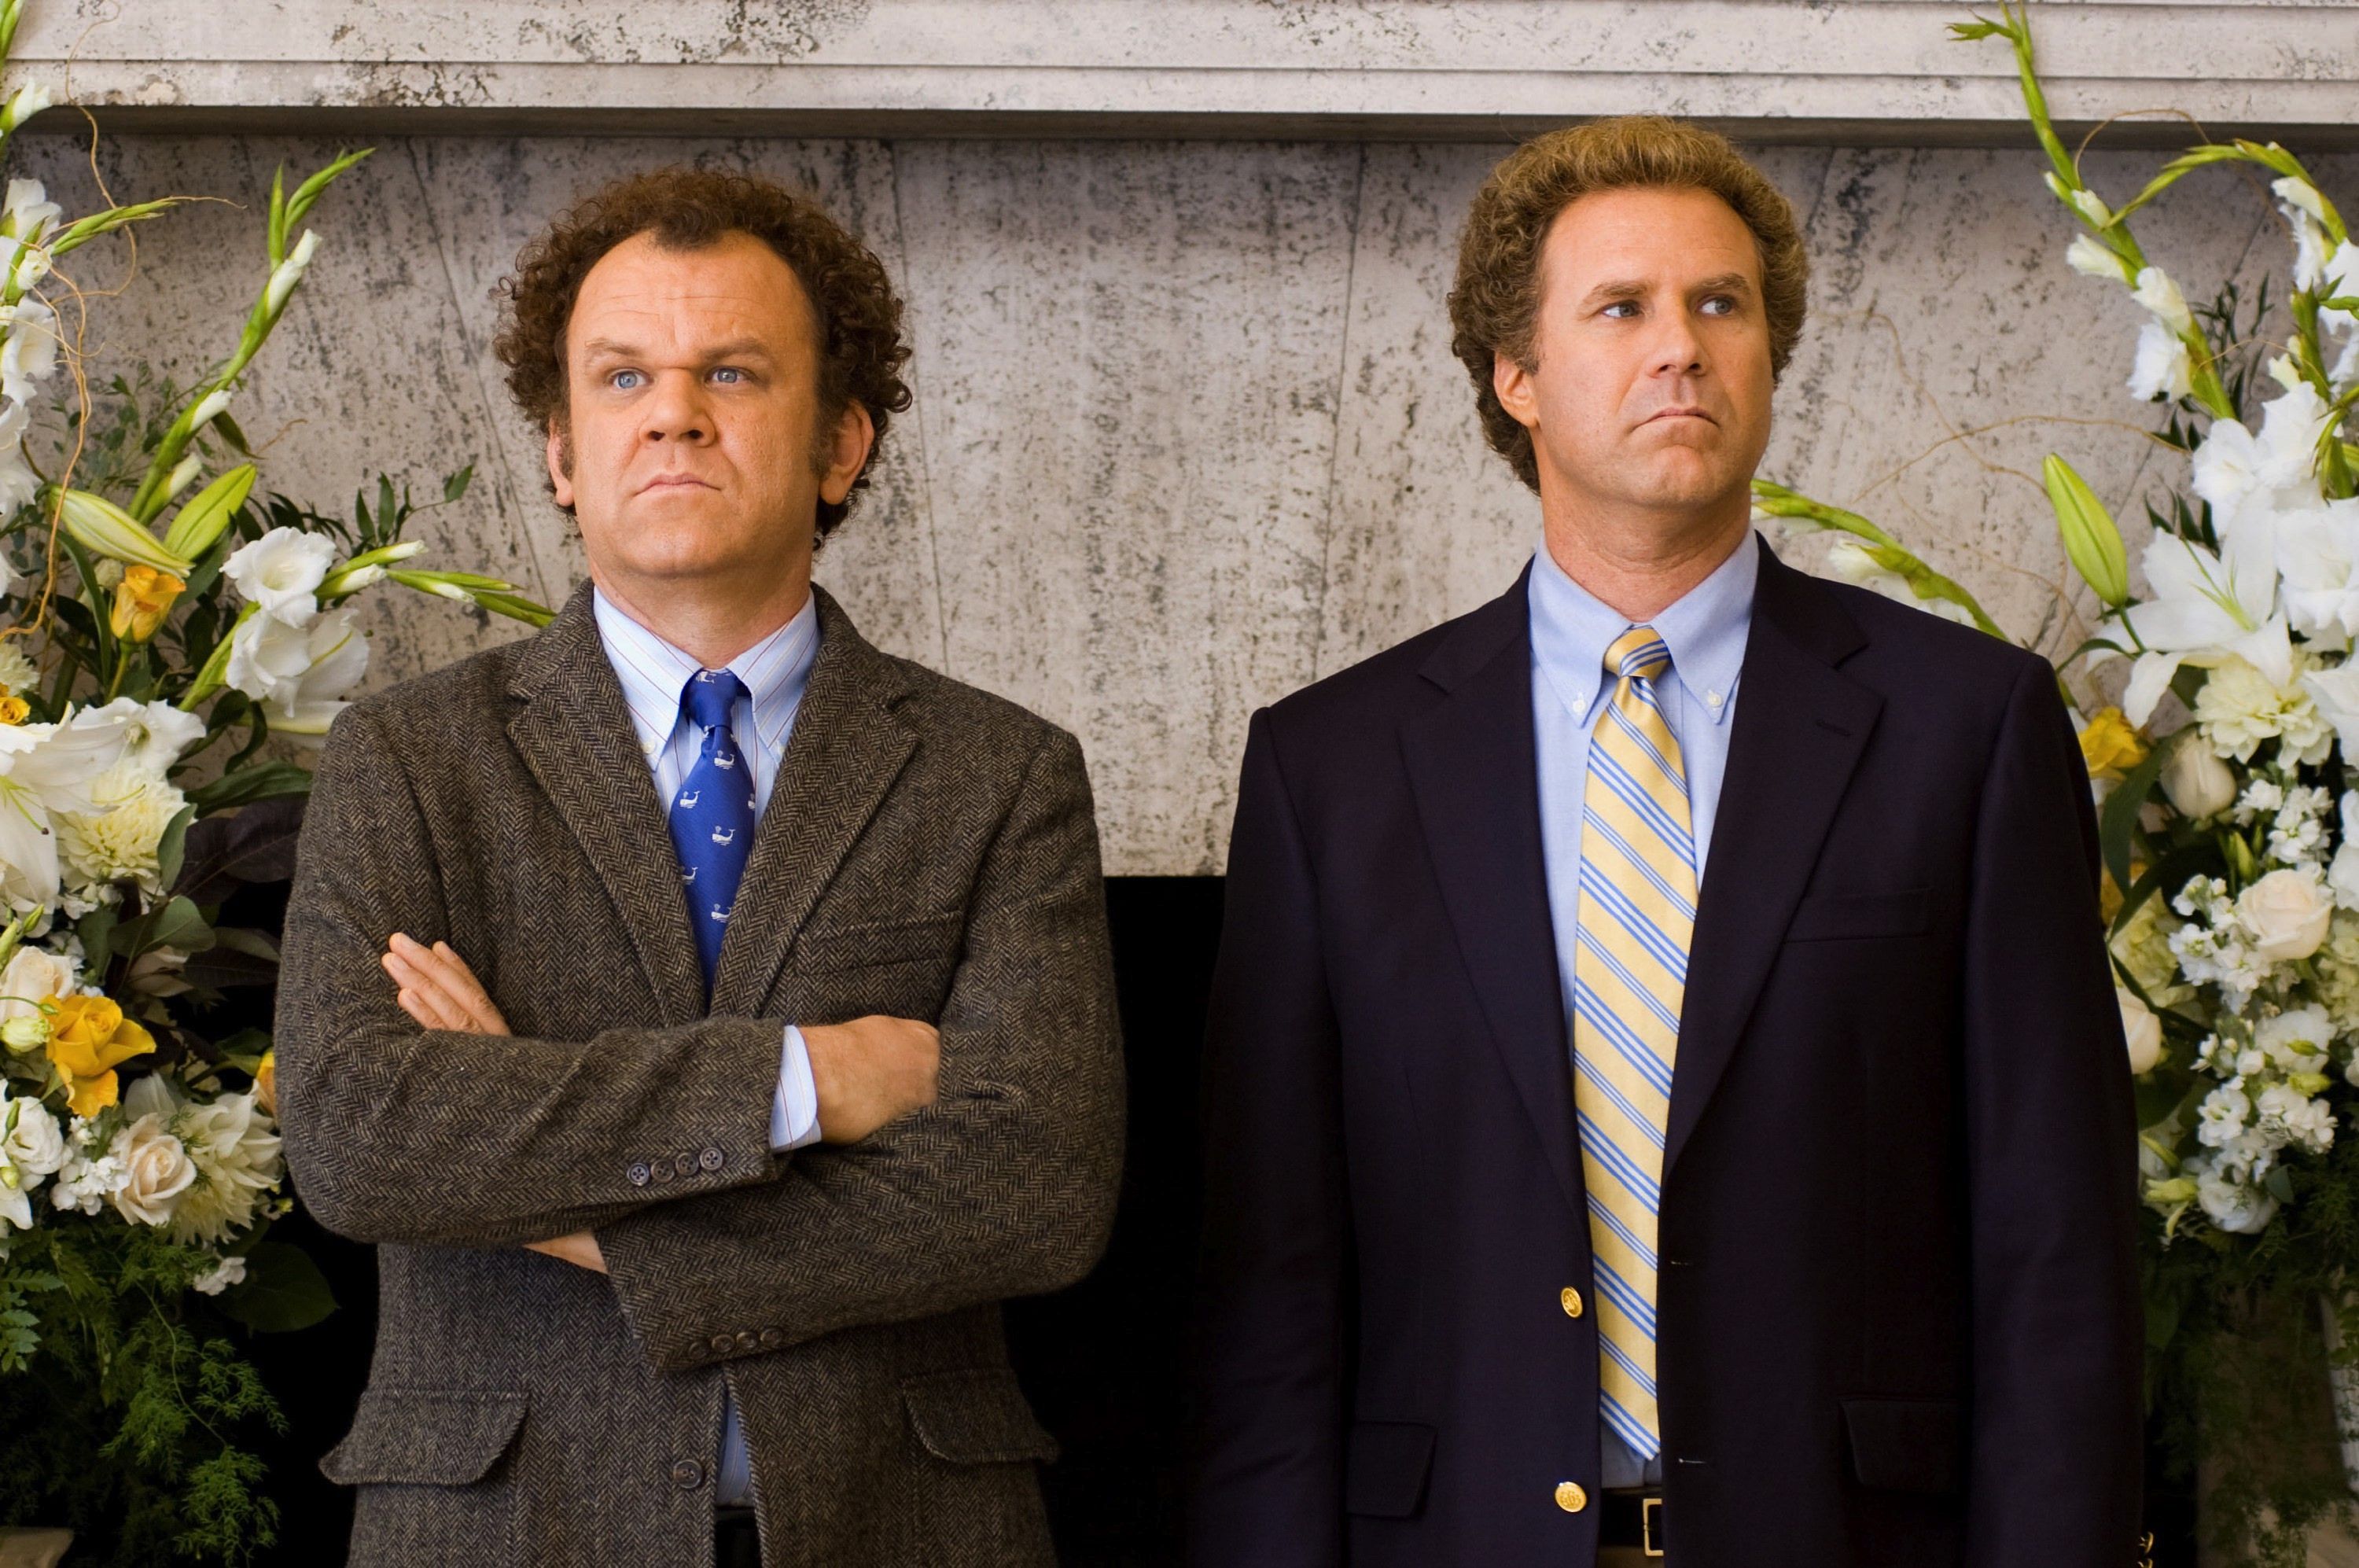 Adam McKay's The Big Short is good. Step Brothers is great.